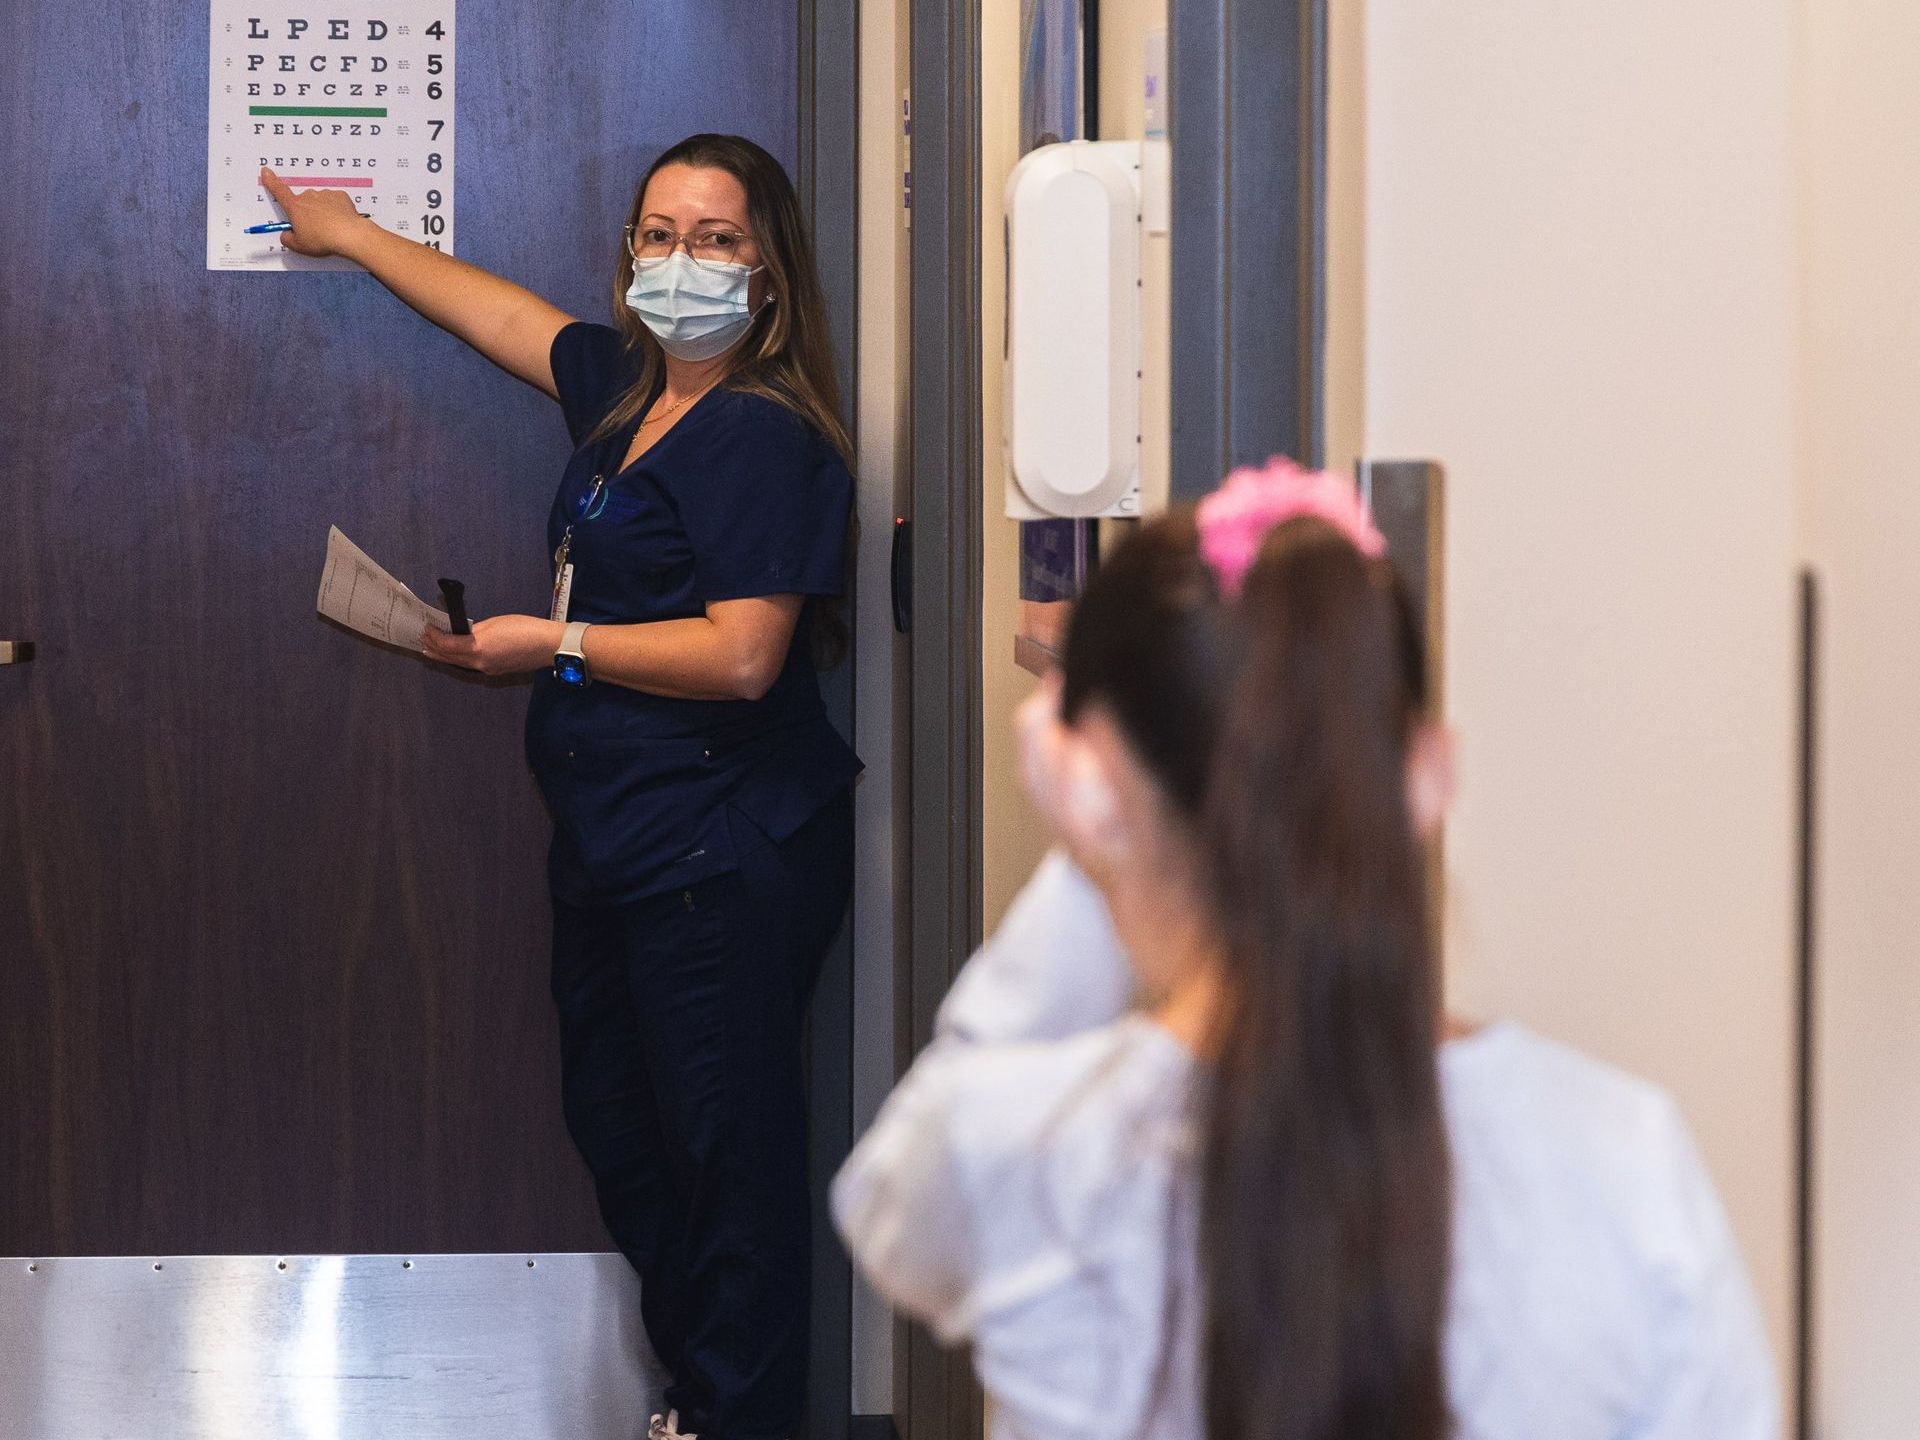 An image of a female doctor pointing to an eye chart in front of a little girl